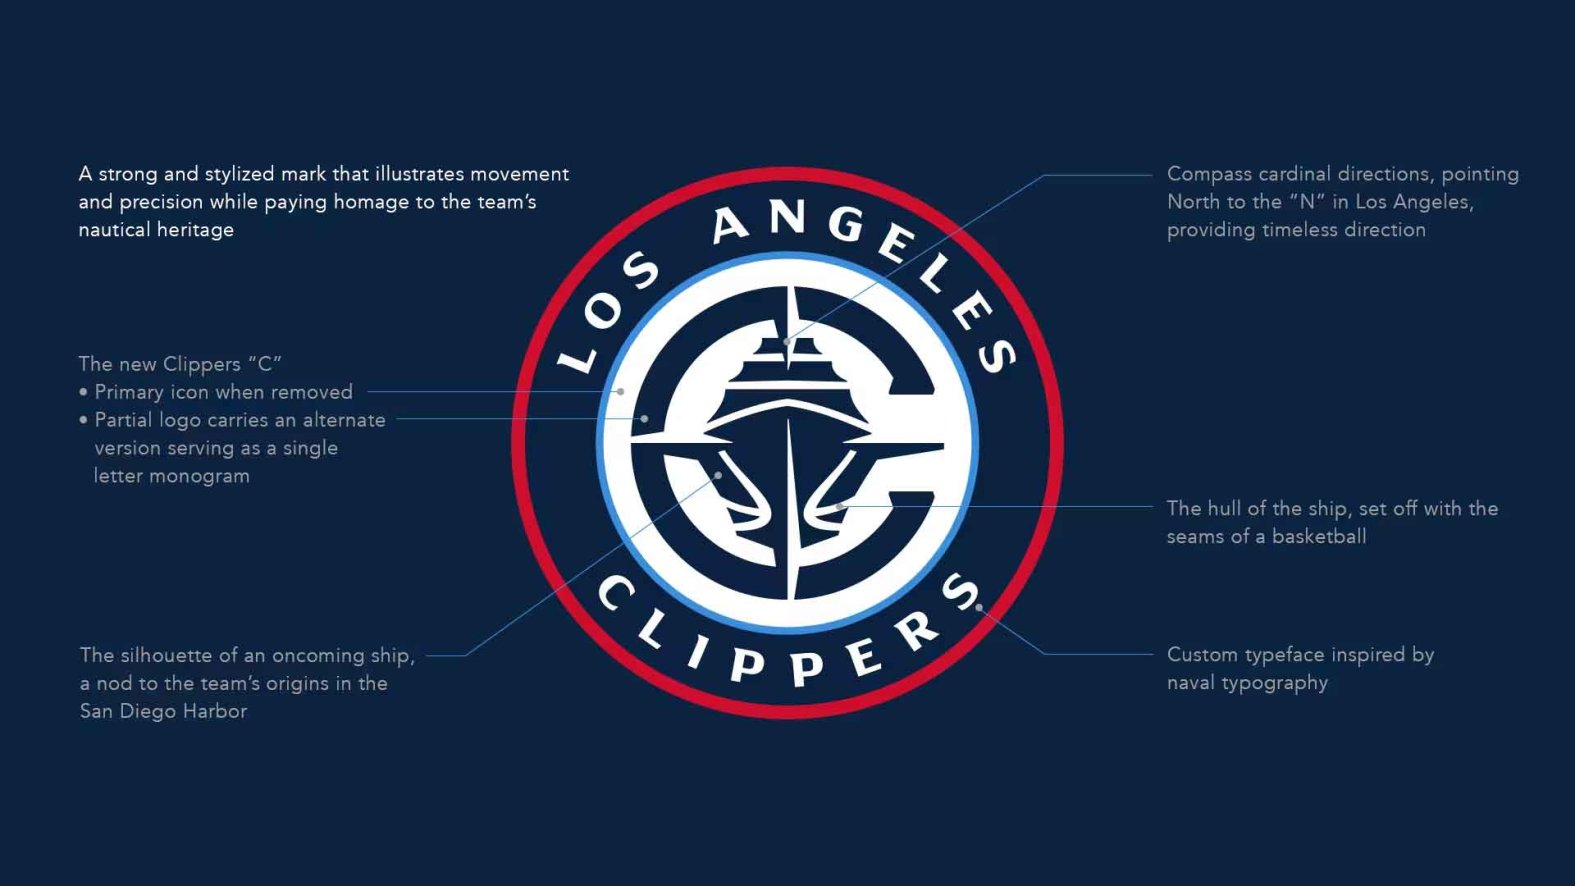 Web 240226 New Clippers Logo 4 ?quality=85&strip=all&fit=1920%2C1080&w=1575&h=886&crop=1